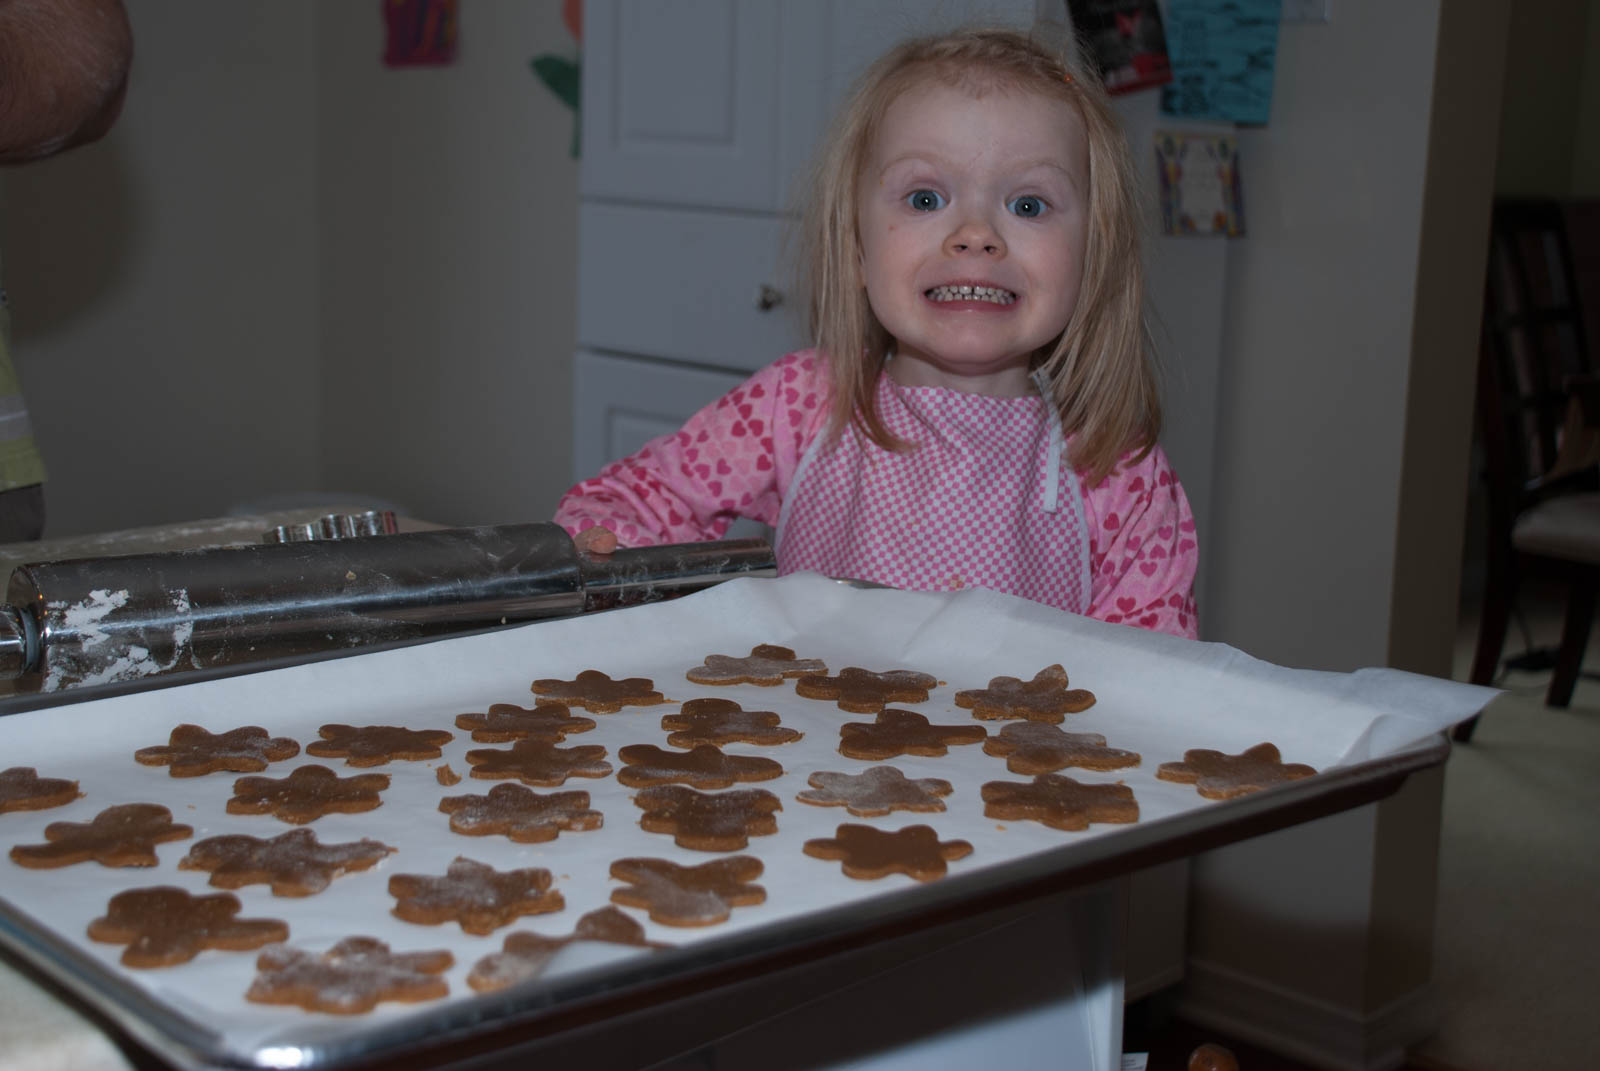 Baking gingerbread - an annual Christmas tradition!